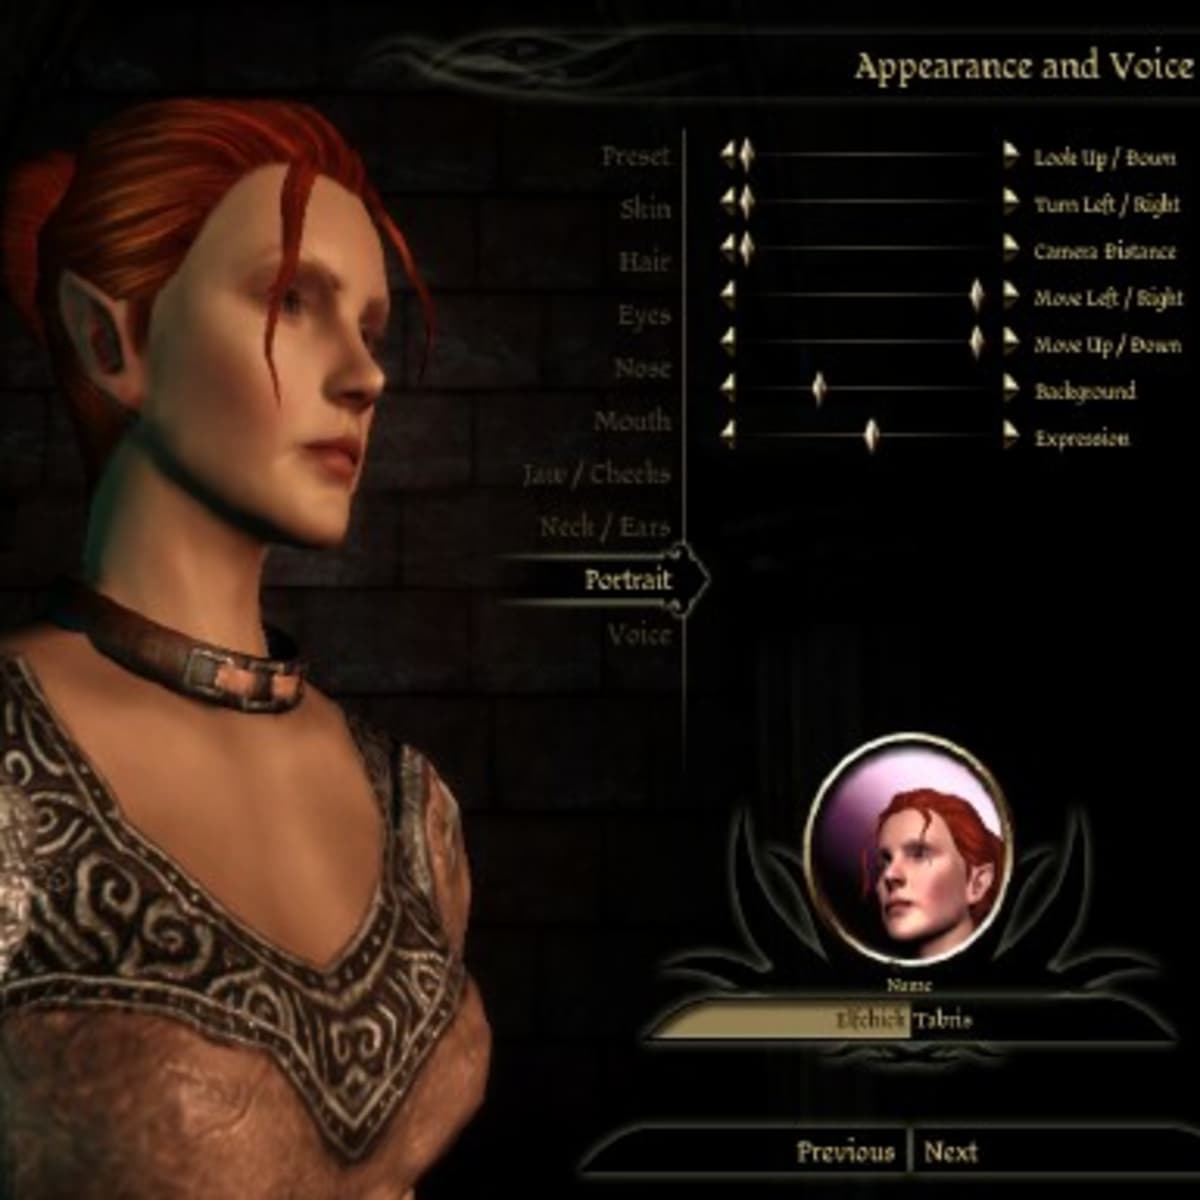 New Dragon Age: Origins Build: Weapon and Shield Warrior